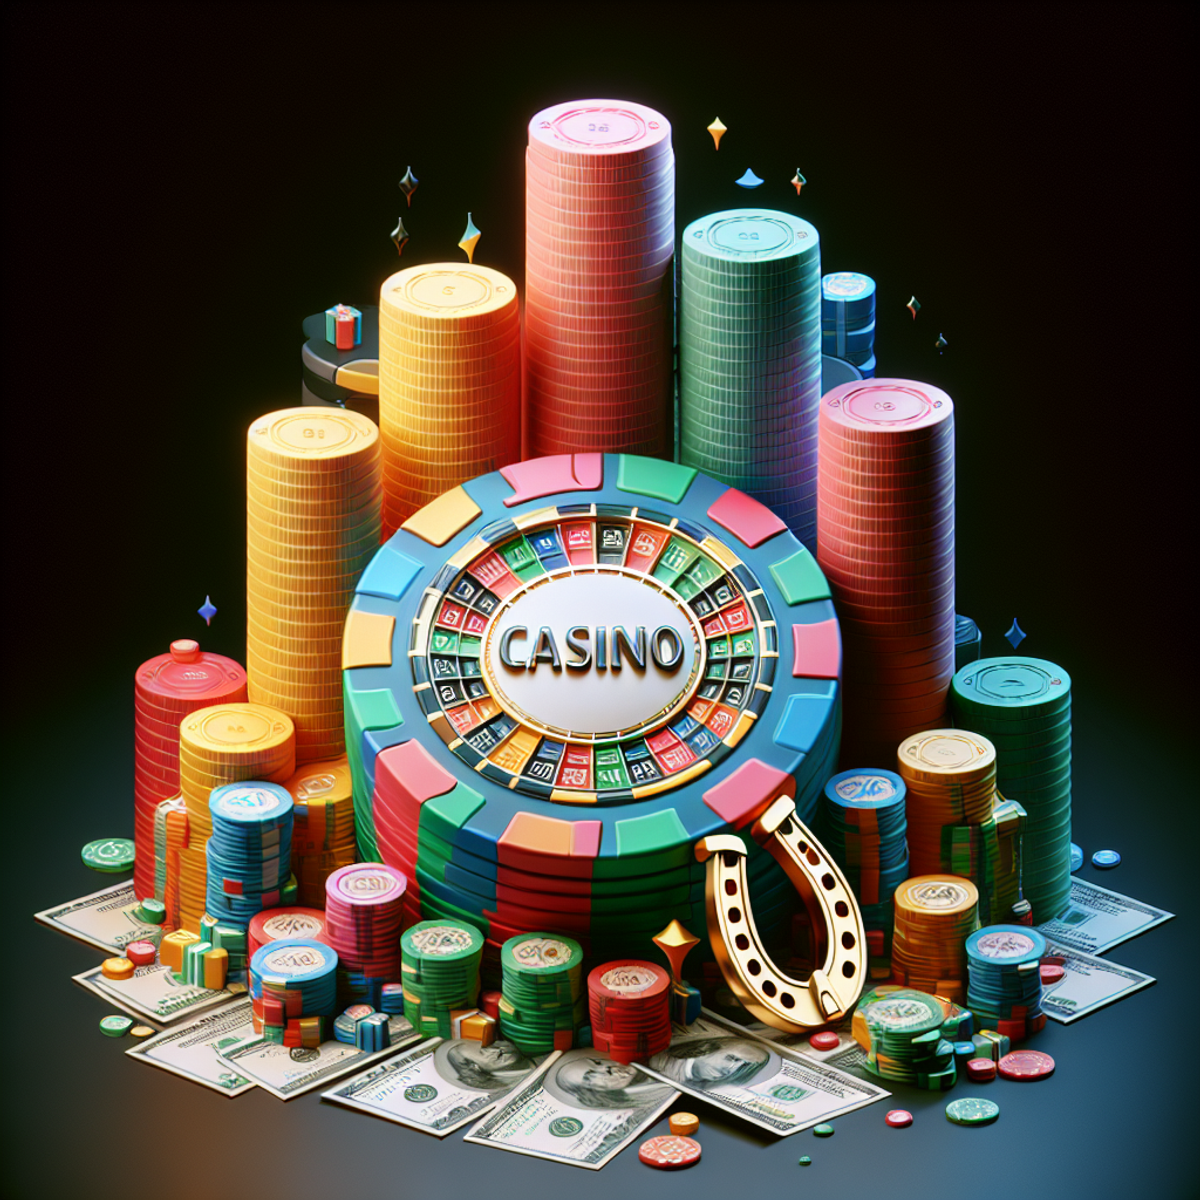 A vibrant casino chip surrounded by stacks of money and a horseshoe for good luck.